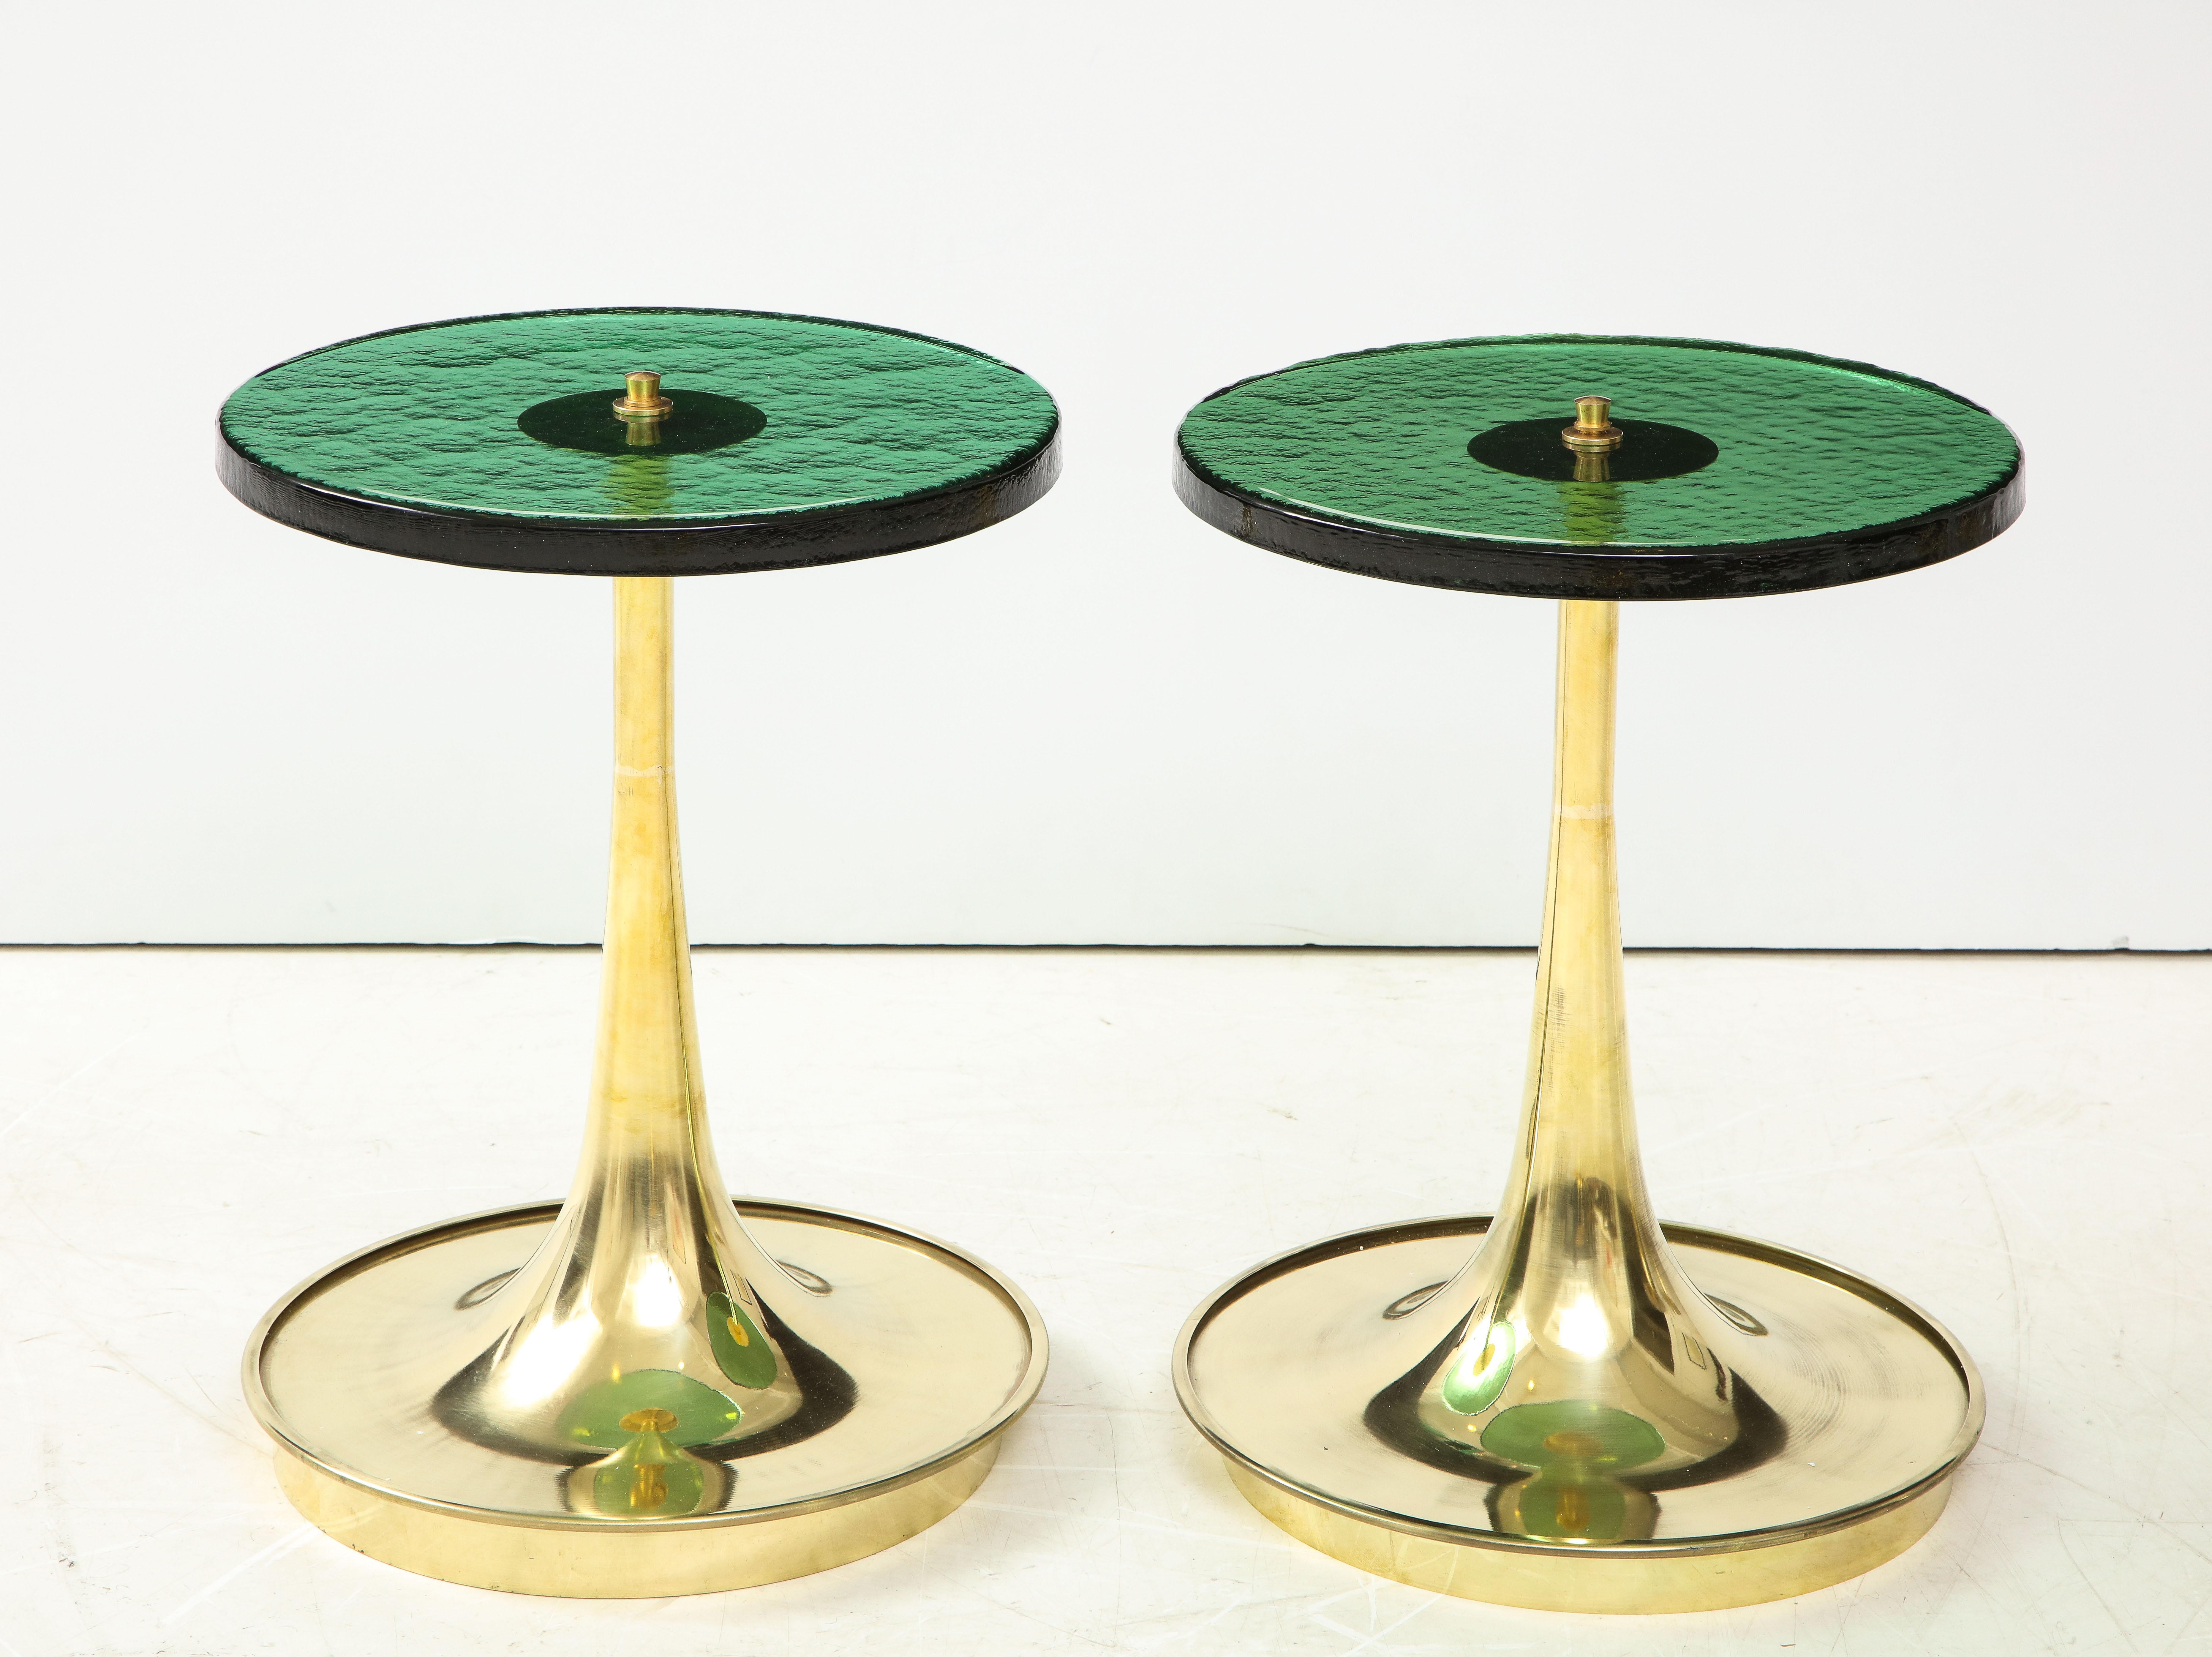 Pair of round emerald green murano glass top and brass martini tables, Italy. Hand-casted thick and solid emerald green Murano round glass sits atop a hand-turned trumpet-shaped brass base. Modern flat top brass finial screws the glass top to the